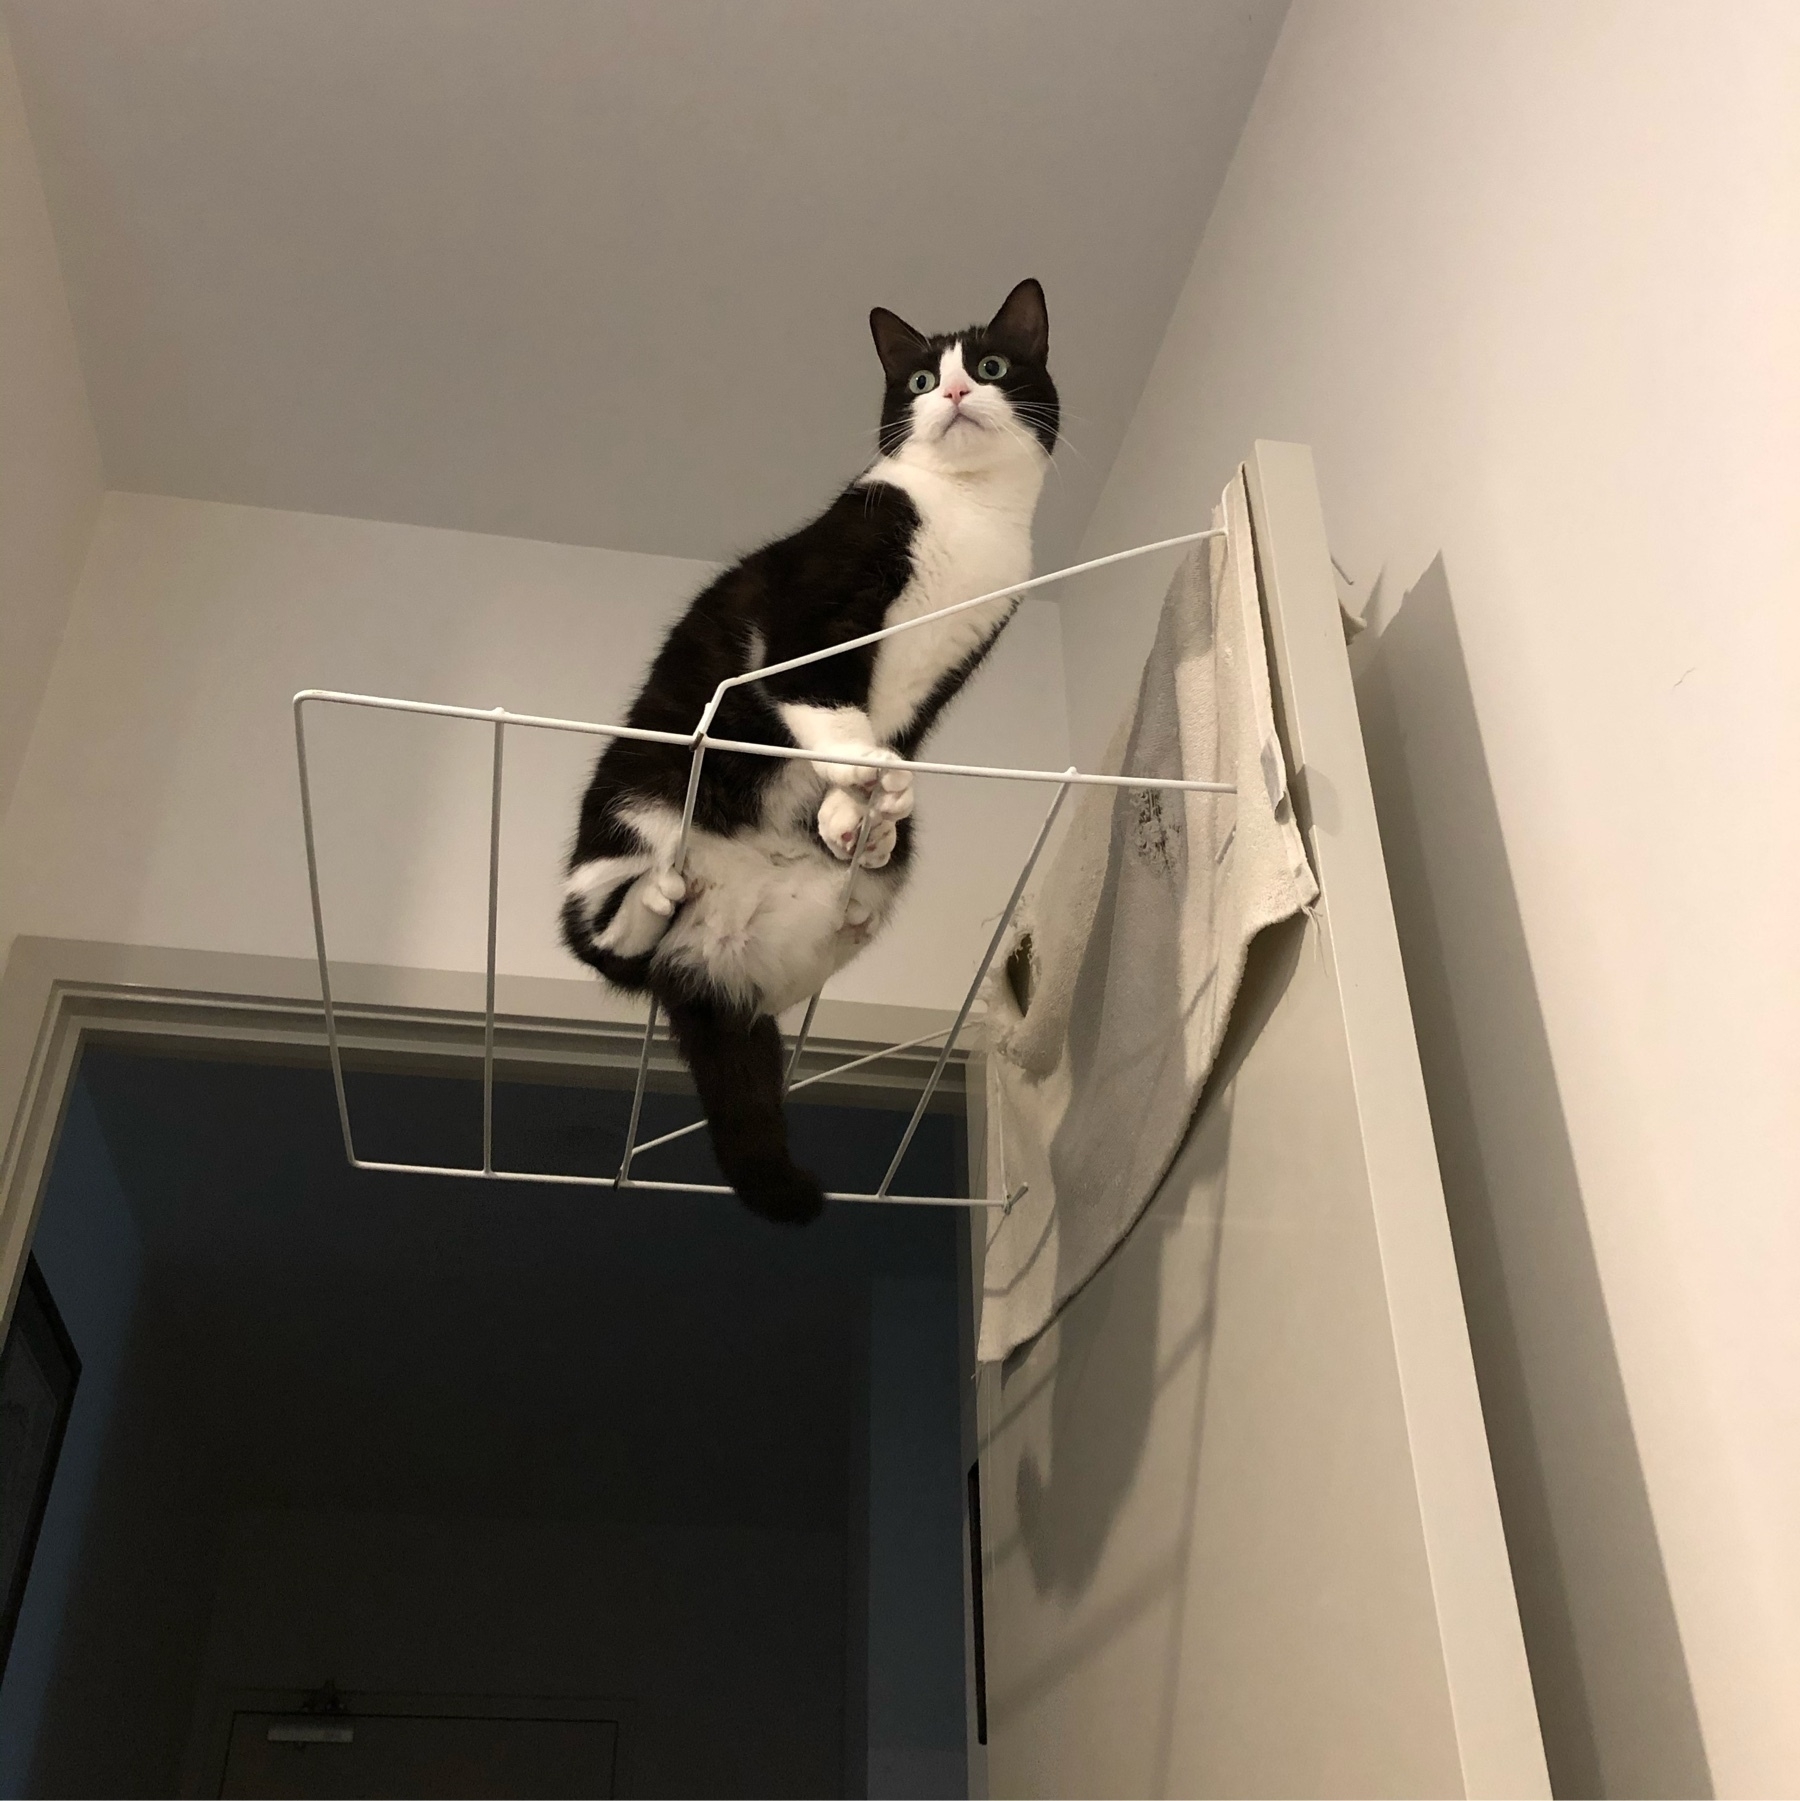 A black and white cat sitting on a clothes airer that is hung over the top of a door. The airer extends horizontally from the doir and the cat is sitting precariously across the thin wire bars of the airer.